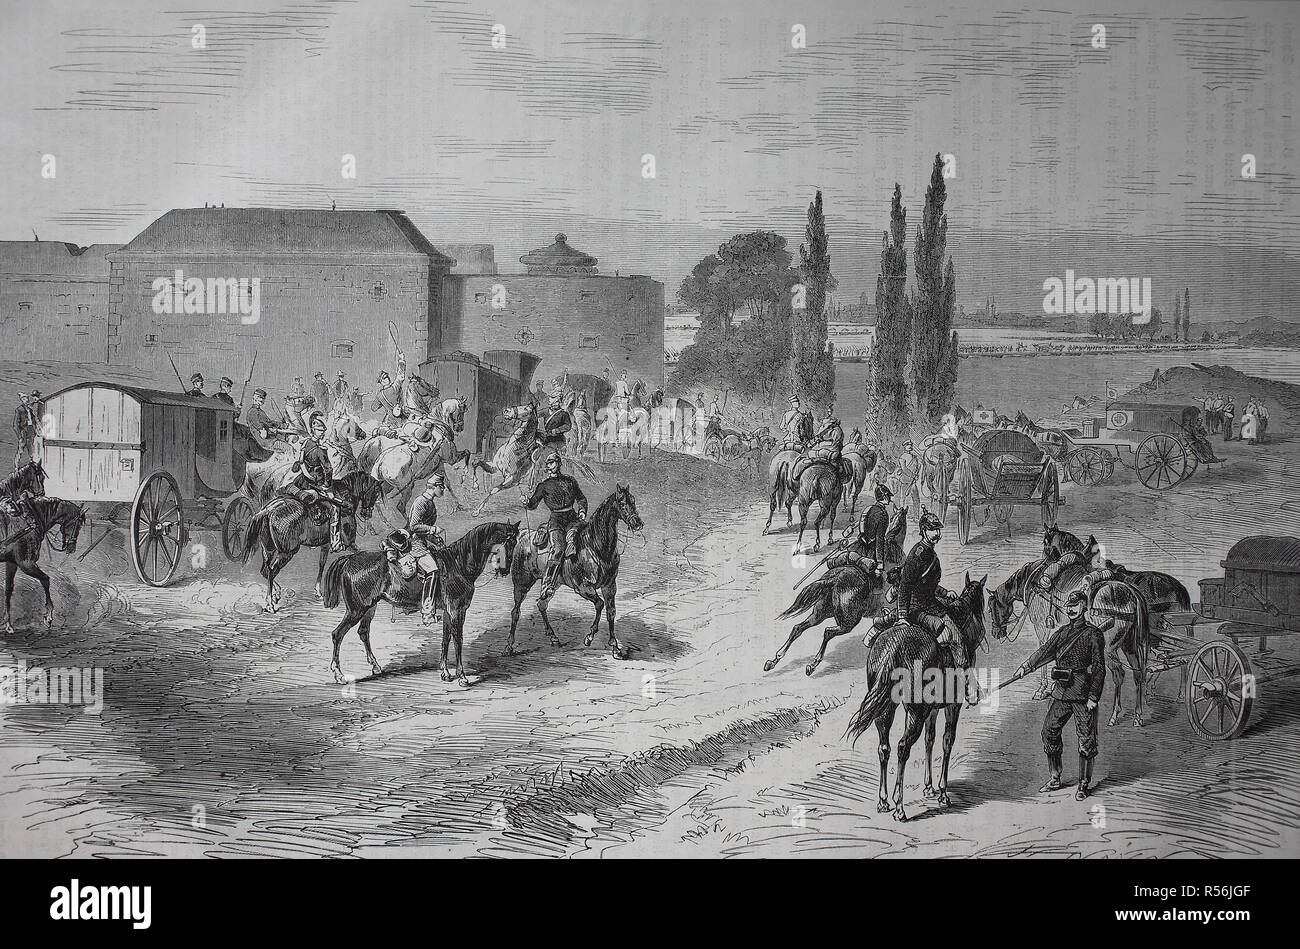 The 12th Army Corps crosses the Rhine at Fort Montebello near Mainz on 3 August 1870, Franco-Prussian War or Franco-German War Stock Photo